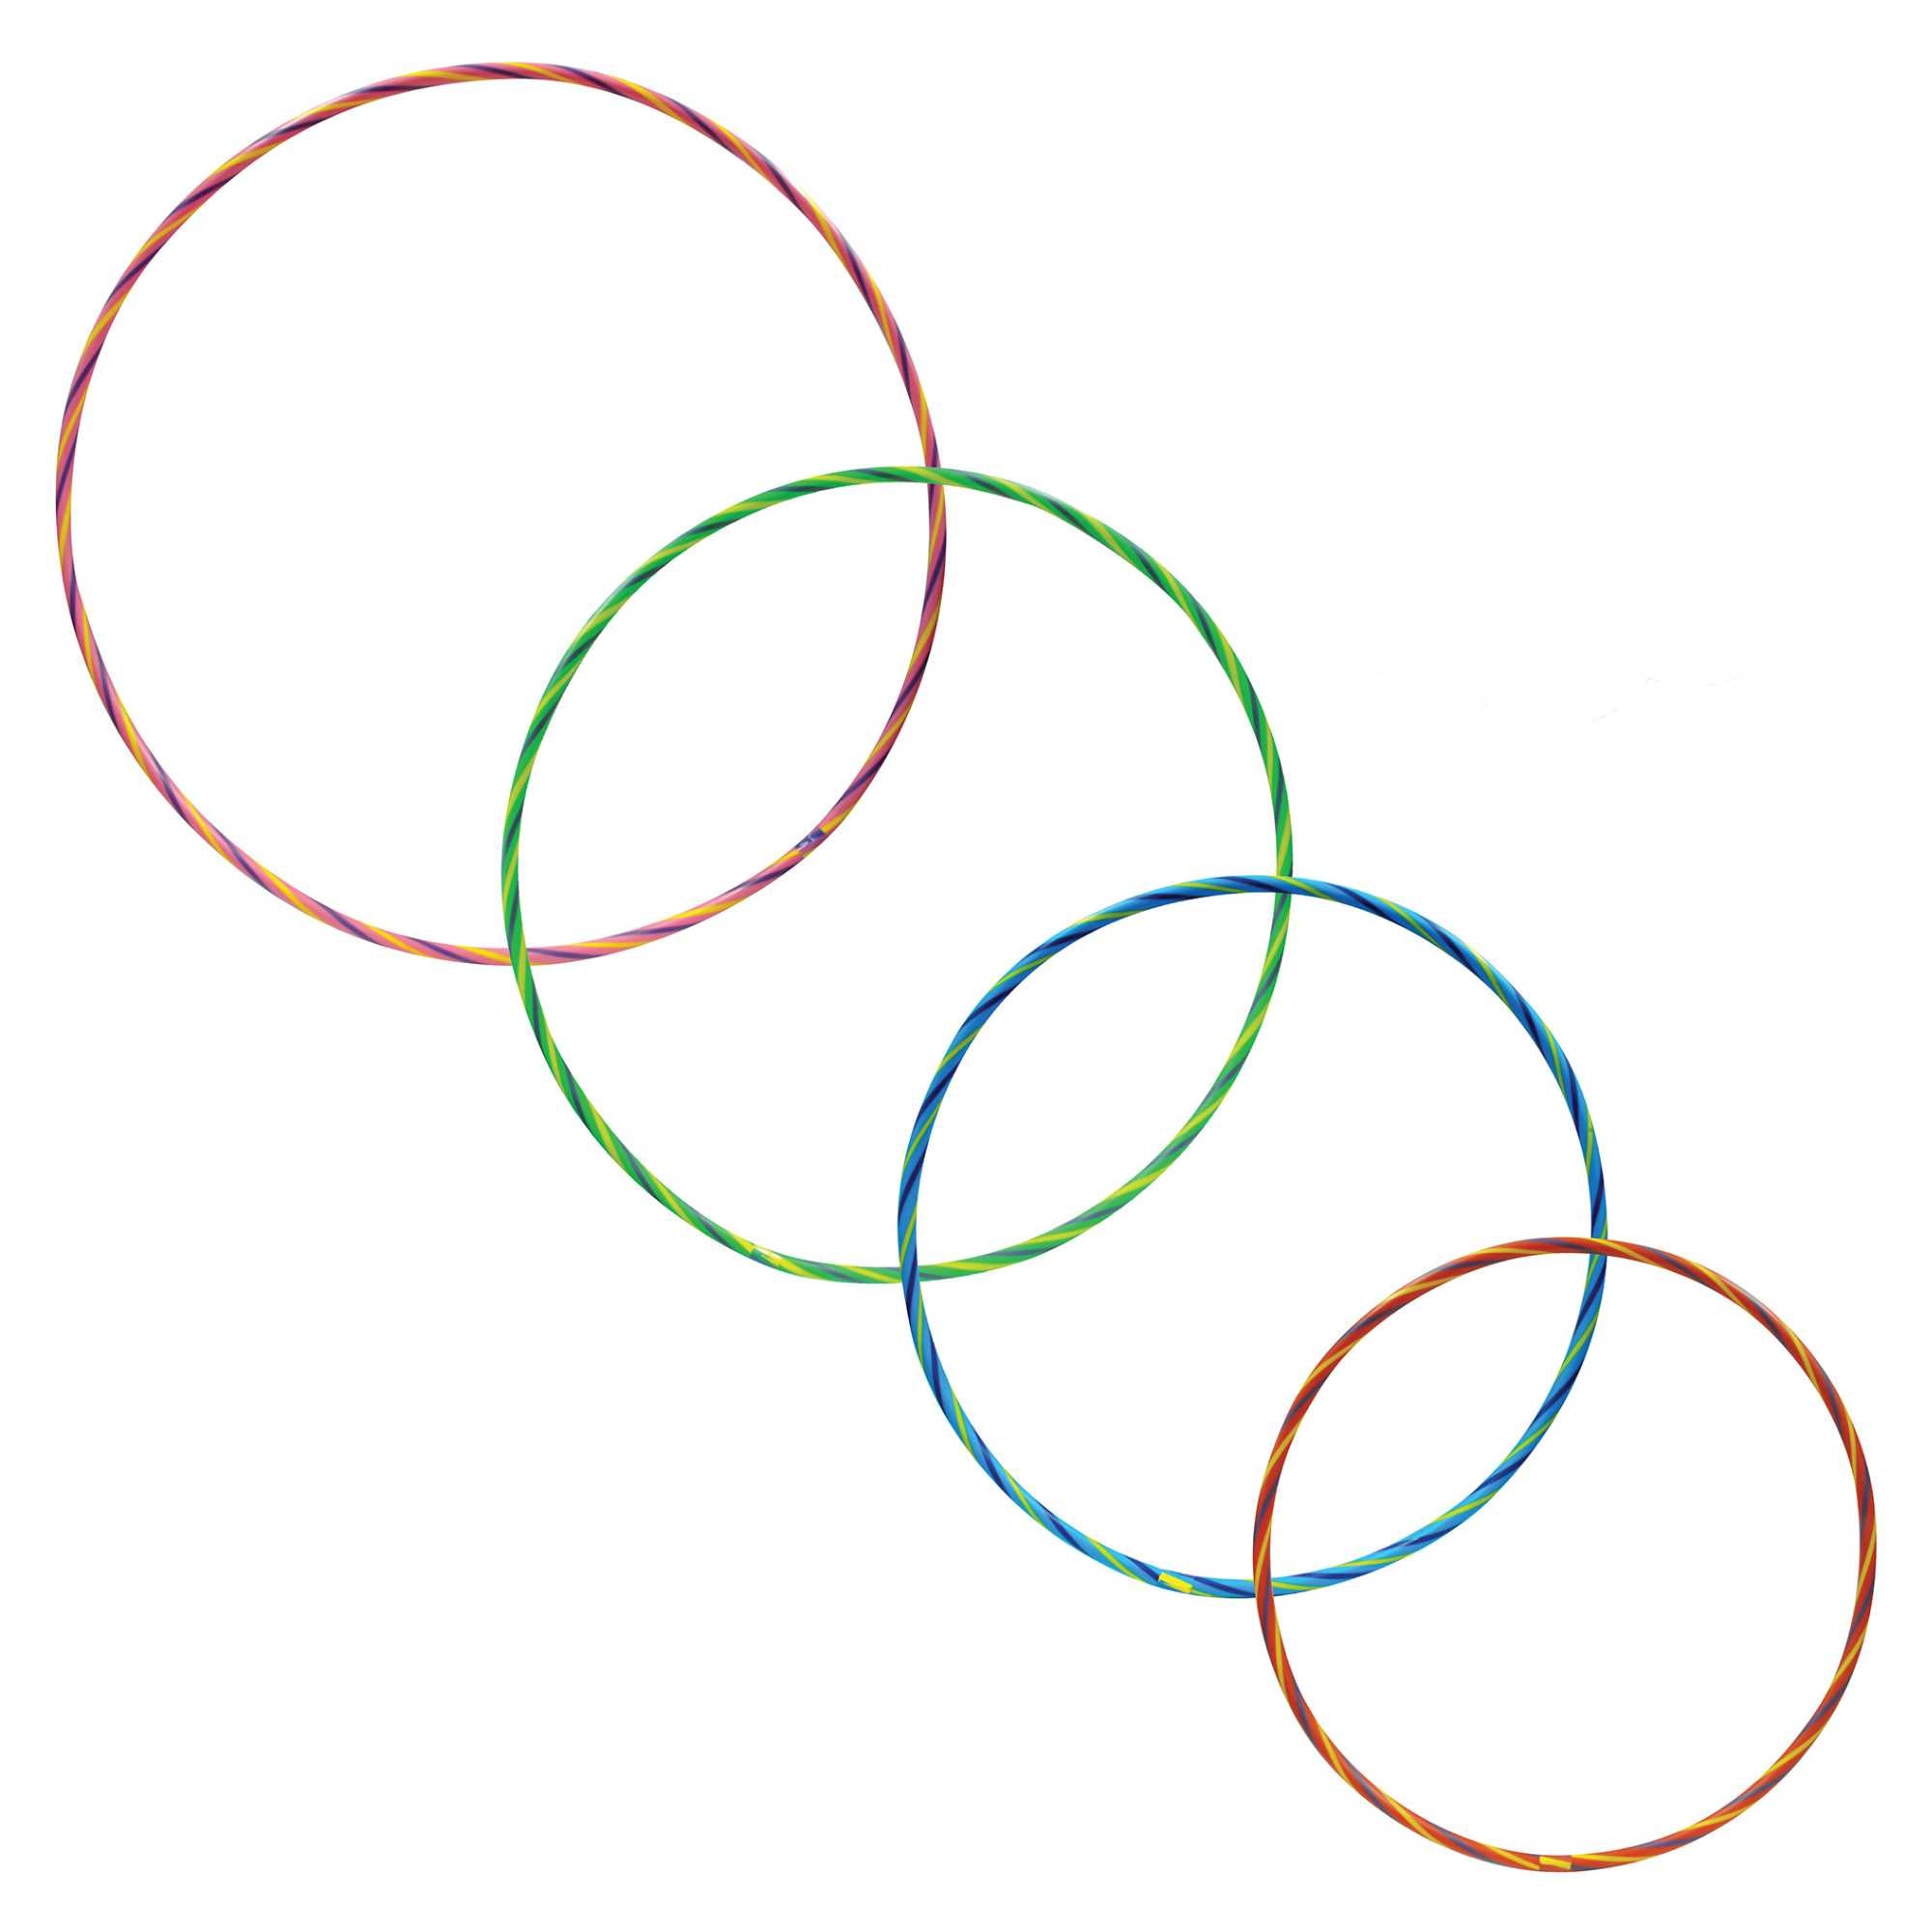 4 Pack of Rainbow Hula Hoops, colorful and durable, perfect for outdoor fun and exercise for kids and adults.